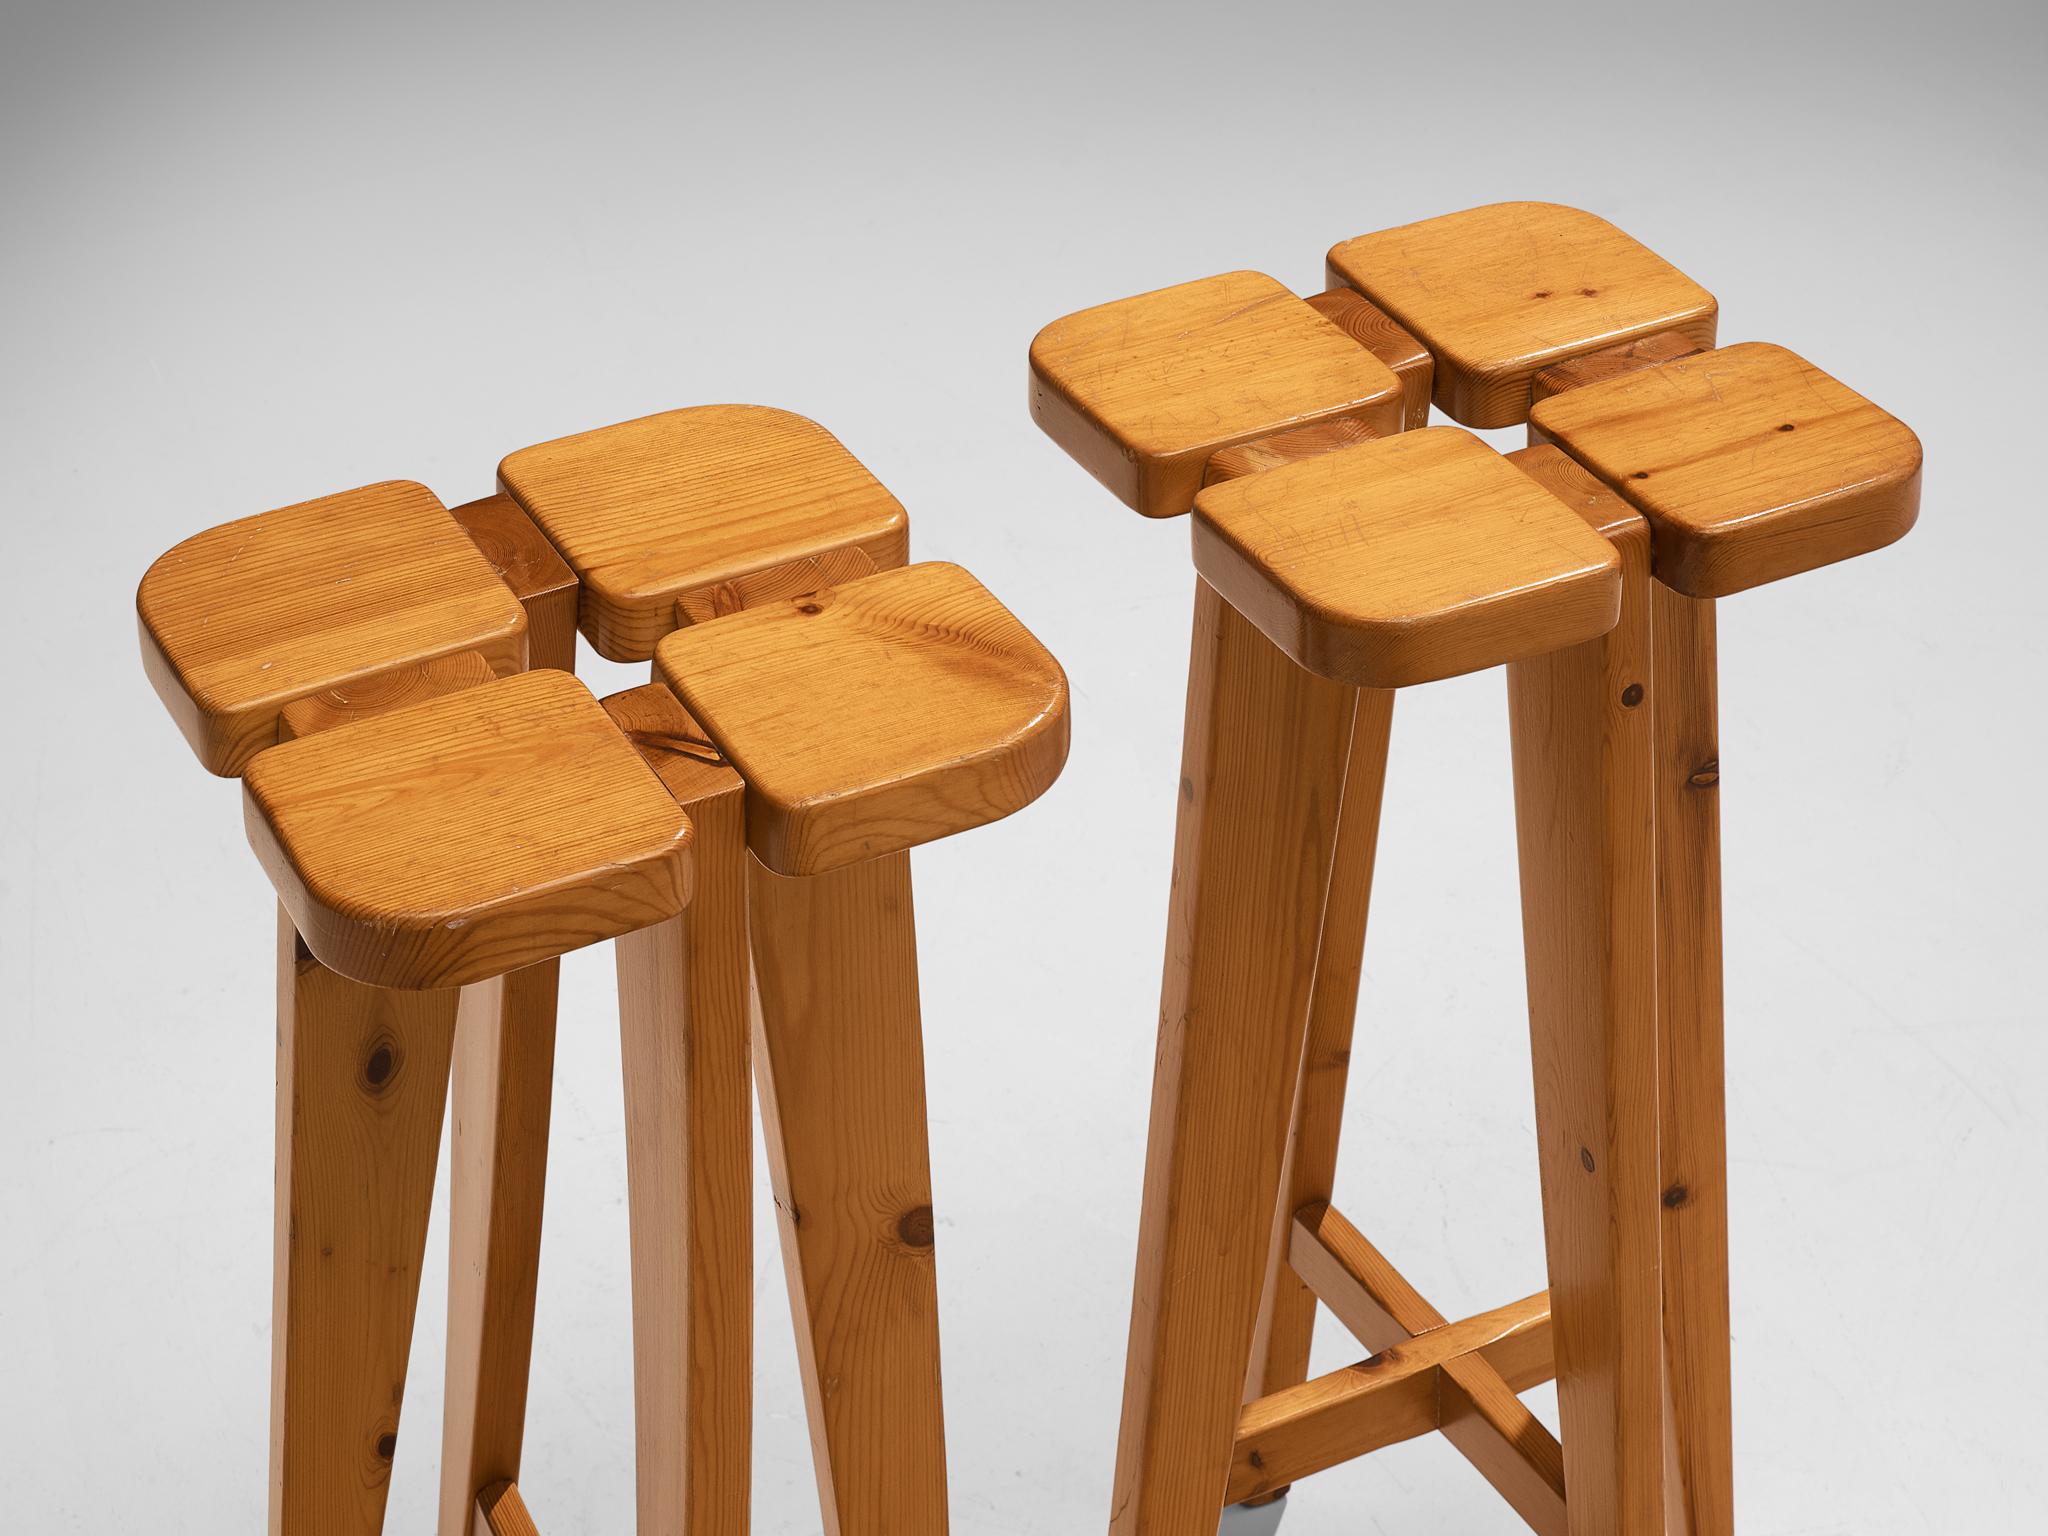 Pair of Barstools in Solid Pine by Lisa Johansson Pape (Mitte des 20. Jahrhunderts)